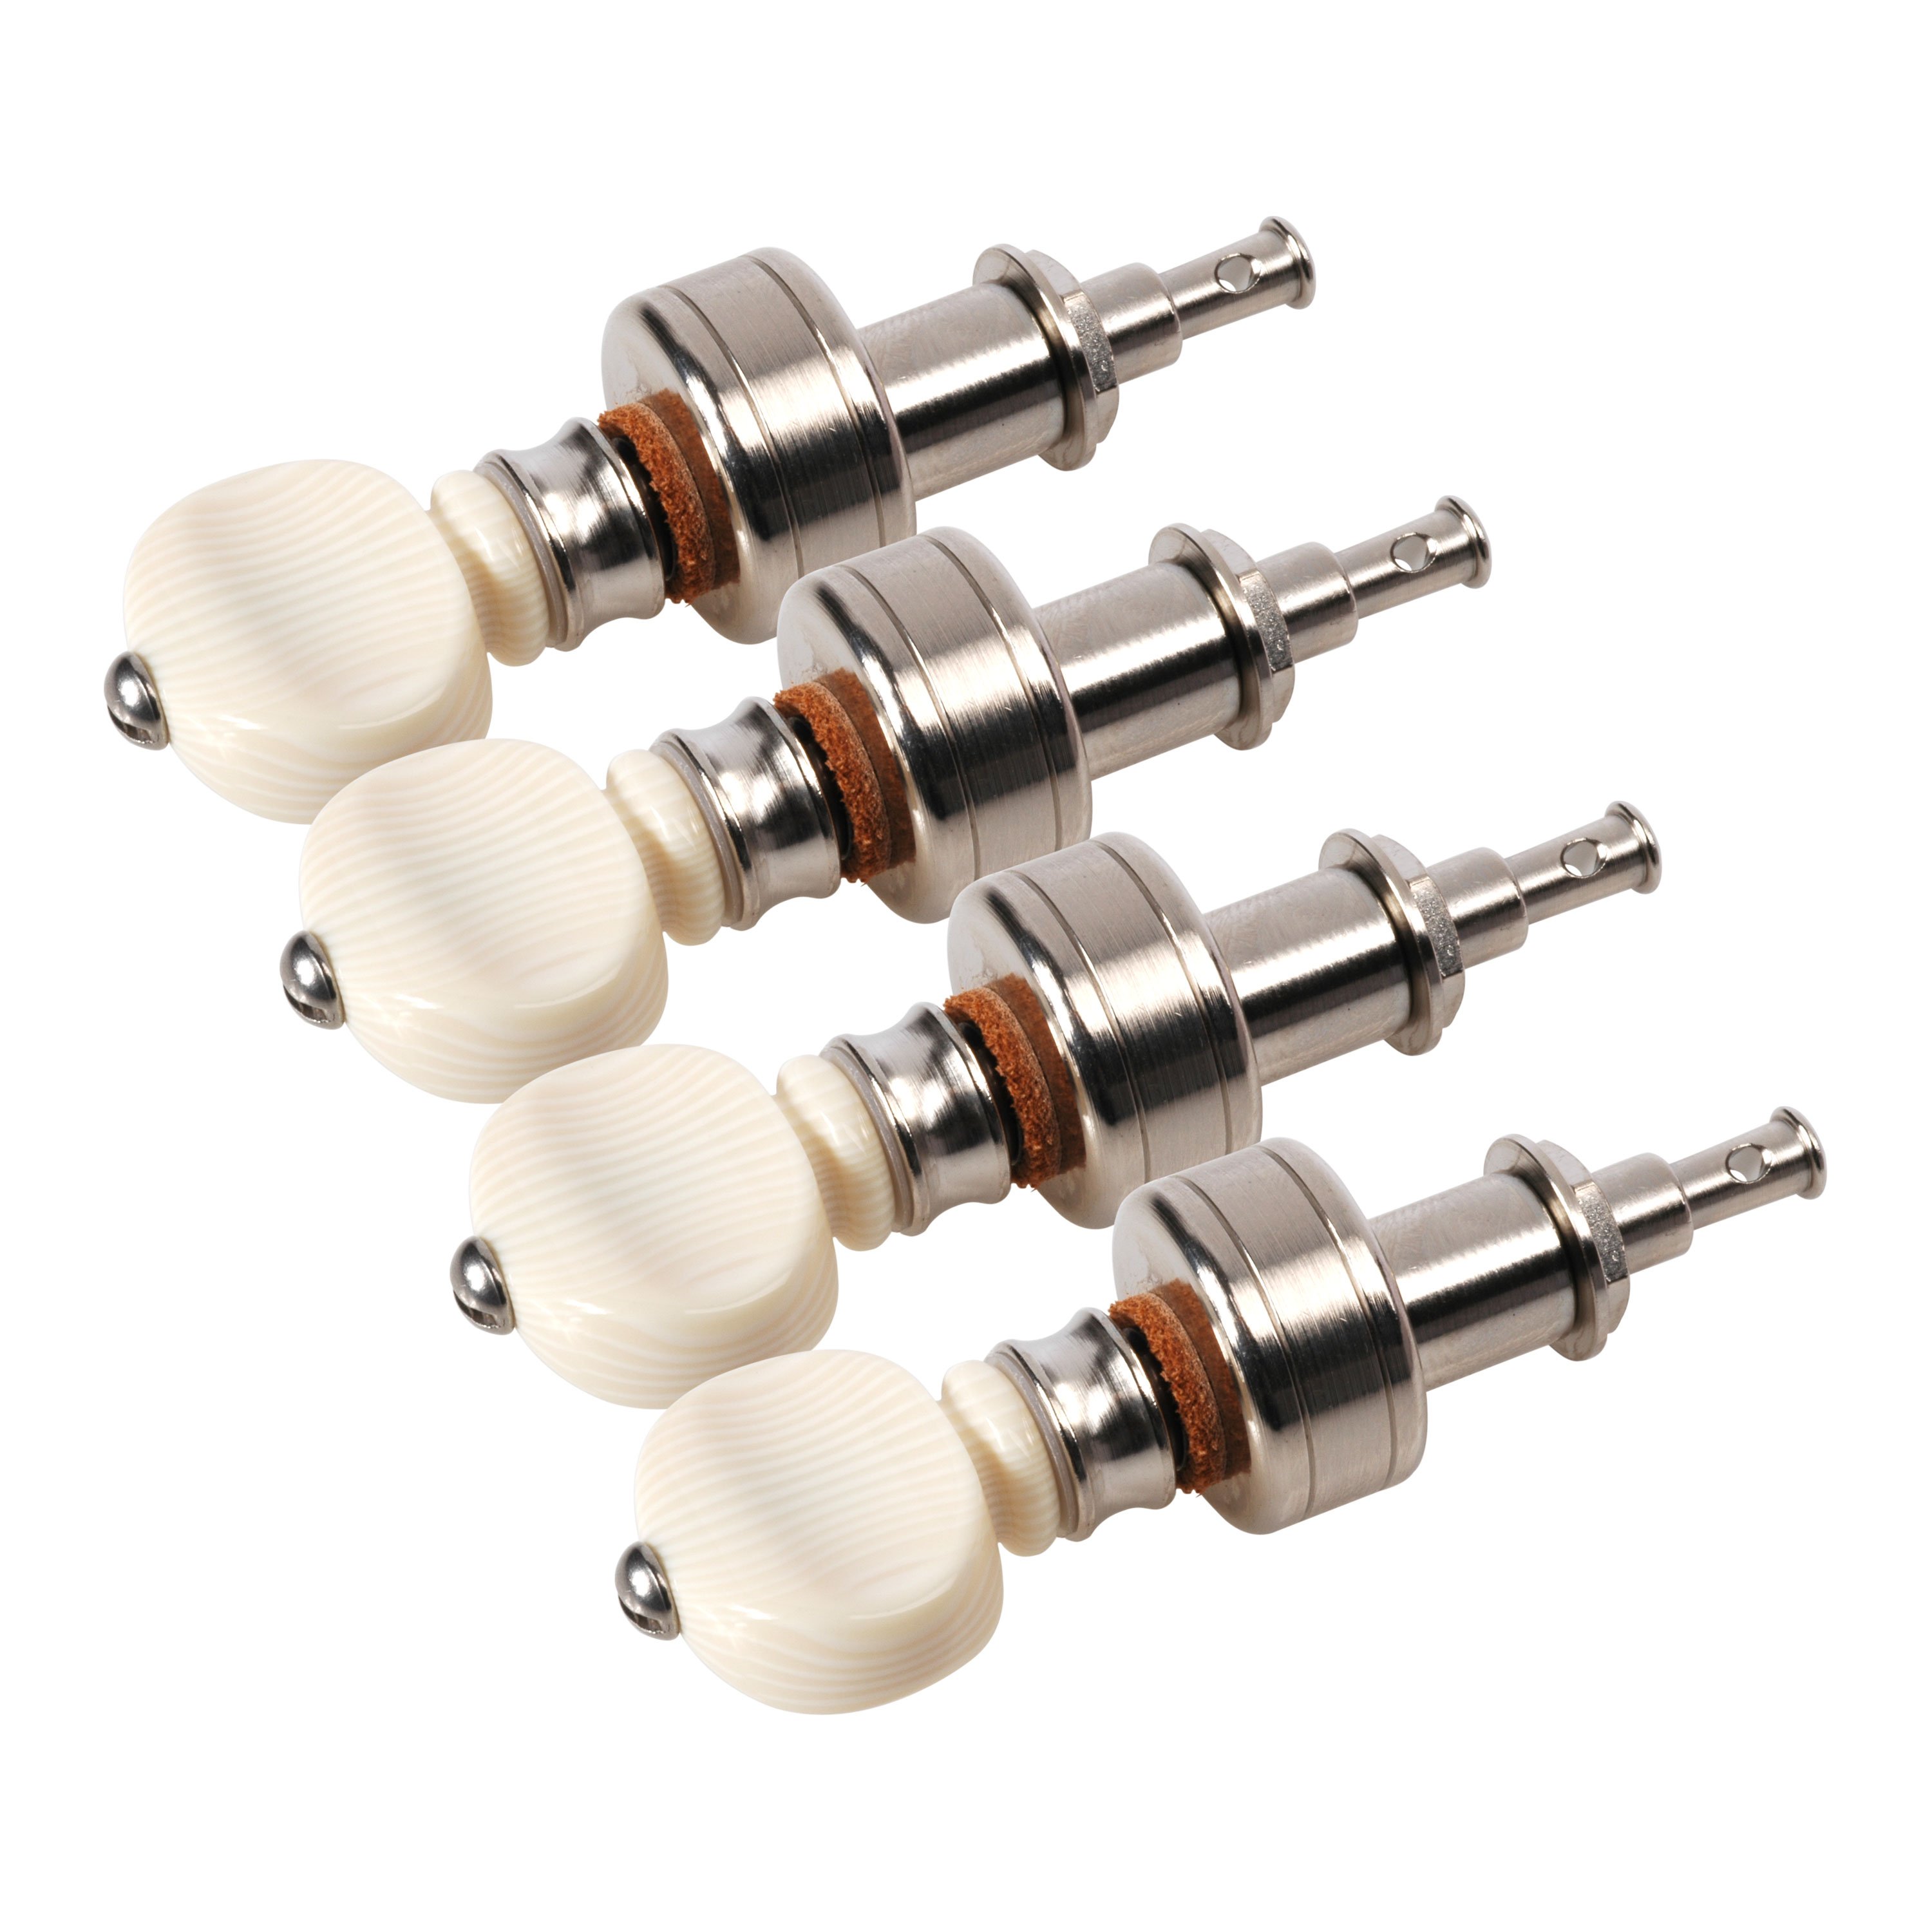 https://www.stewmac.com/globalassets/product-images/m003000/m003200/m003297-waverly-banjo-tuning-pegs/variant/3290-1-set-of-6-3000.jpg?hash=637623889800000000